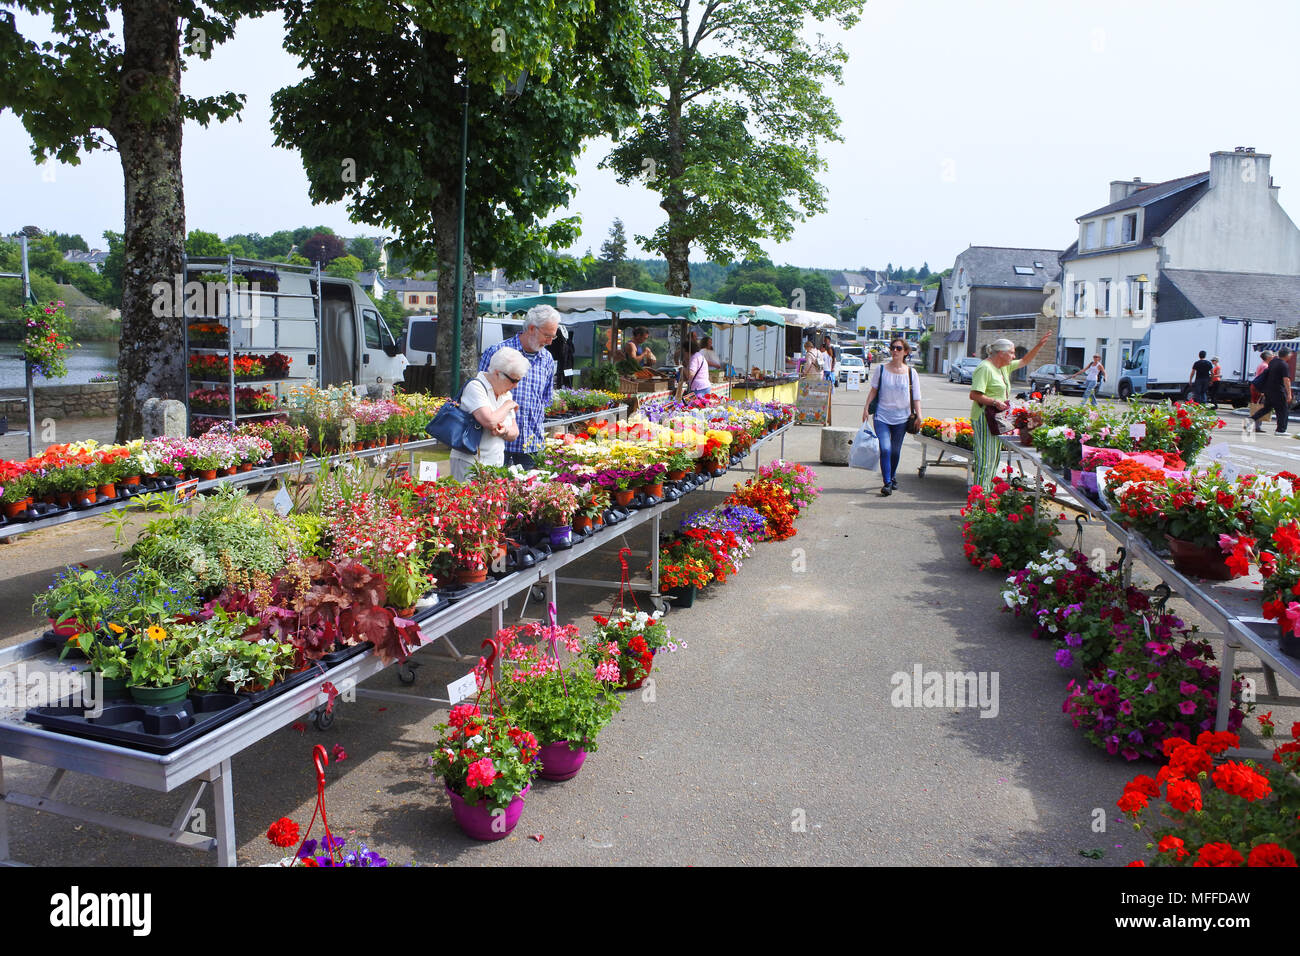 A plant and flower street market stall, Huelgoat, Brittany, France - John Gollop Stock Photo